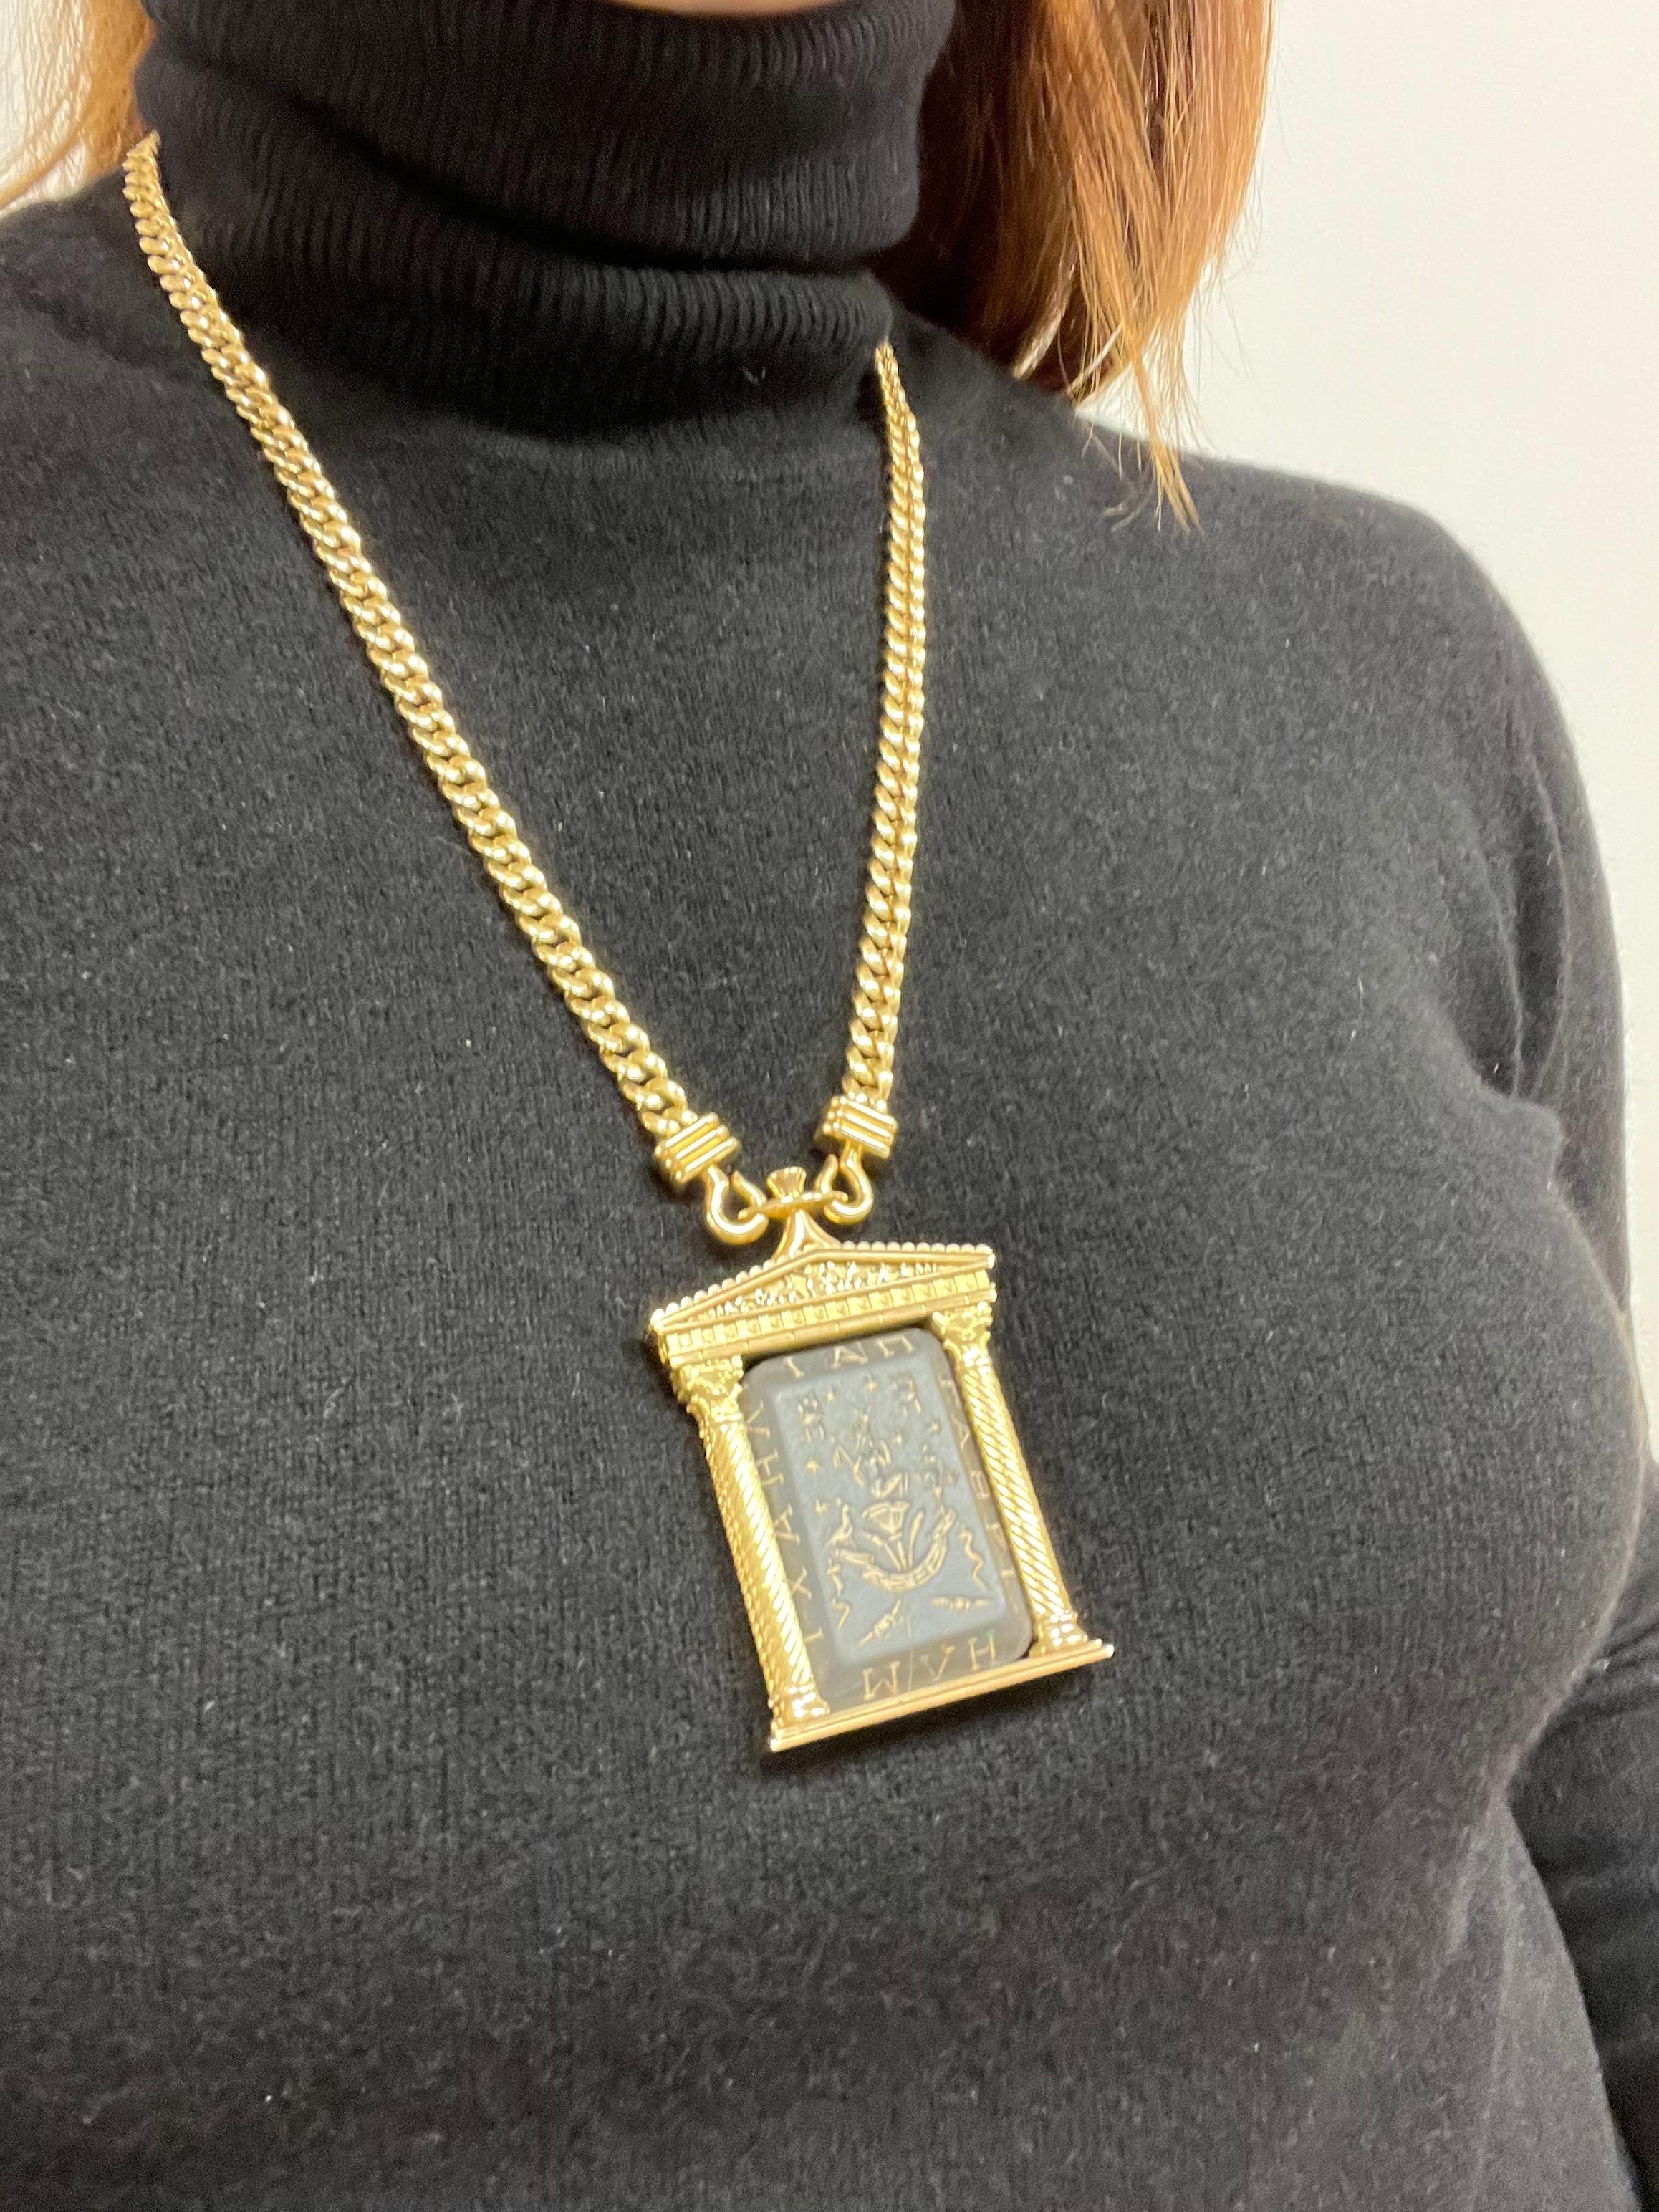 One of a Kind 1970 Bulgari 18 Karat Yellow Gold Necklace with Engraved Pendant 2